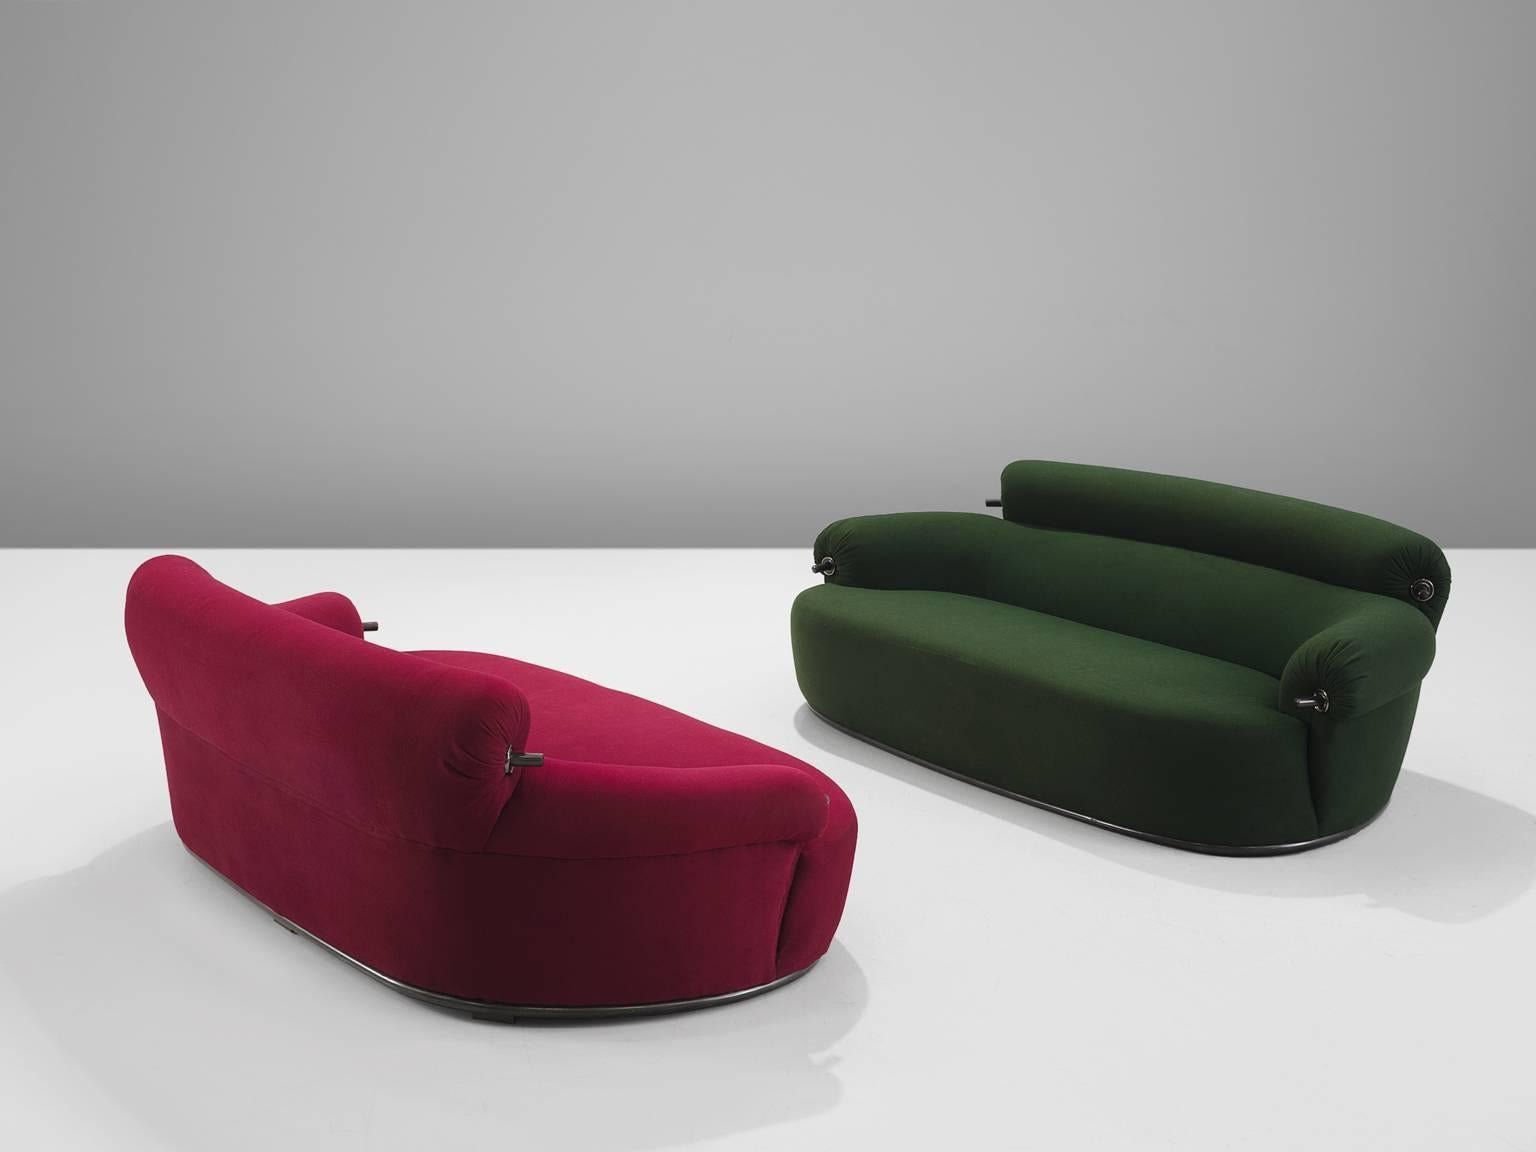 Luigi Caccia Dominioni for Azucena, toro sofa, red and green fabric, Italy, 1979.

This sofa model 'P20B Toro' is produced by Azucena. The set of sofas is designed by Luigi Caccio Dominioni who was based in Milan. The sofa is nicknamed Toro which is